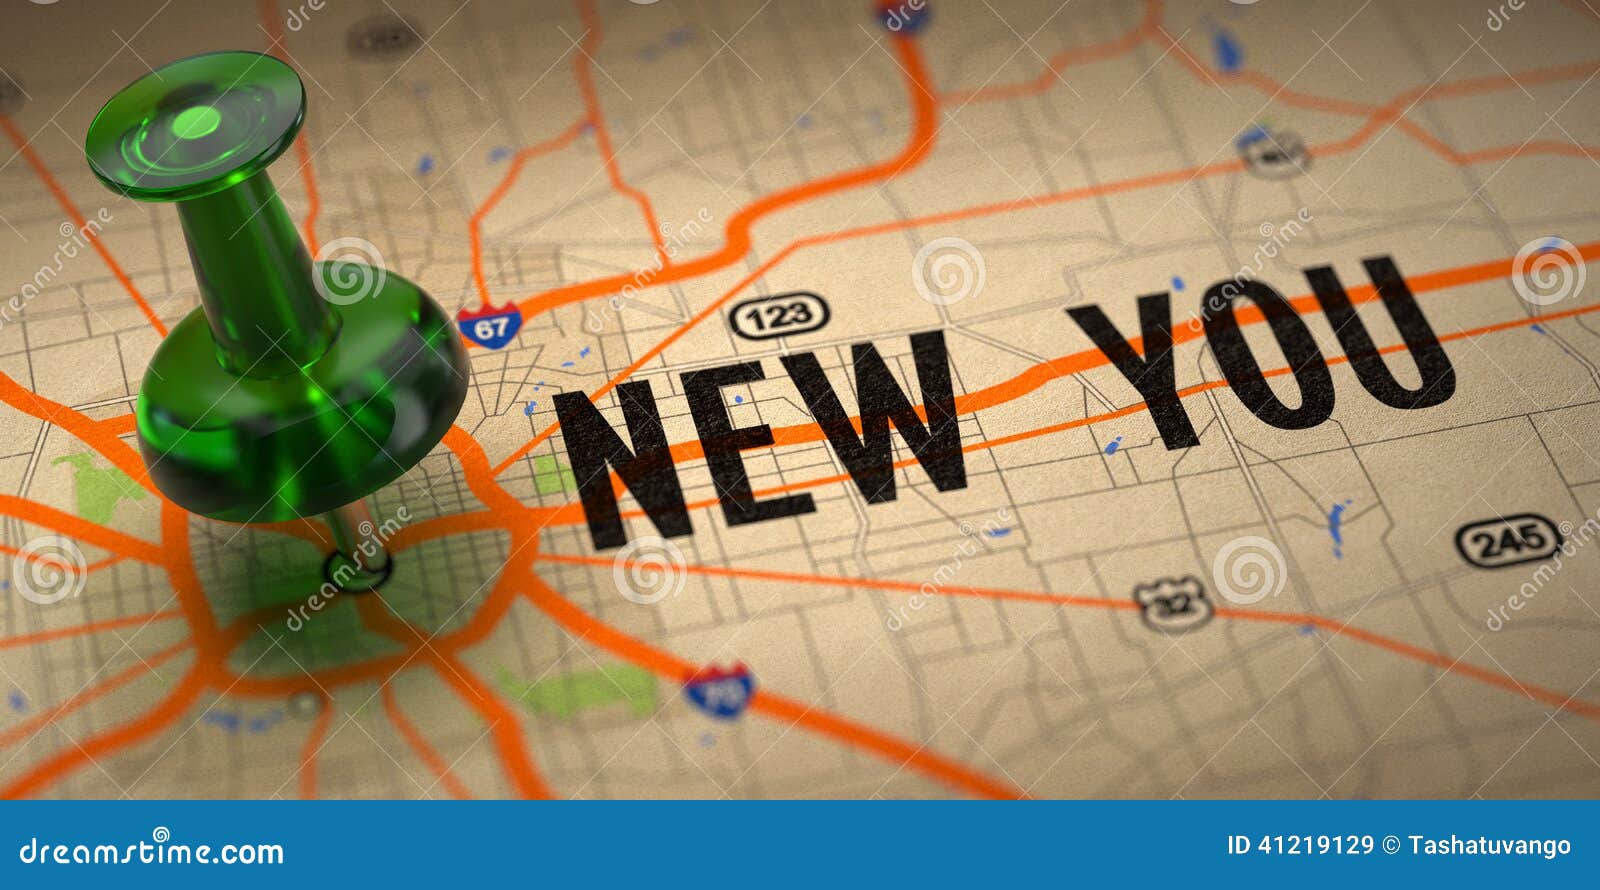 new you - green pushpin on a map background.